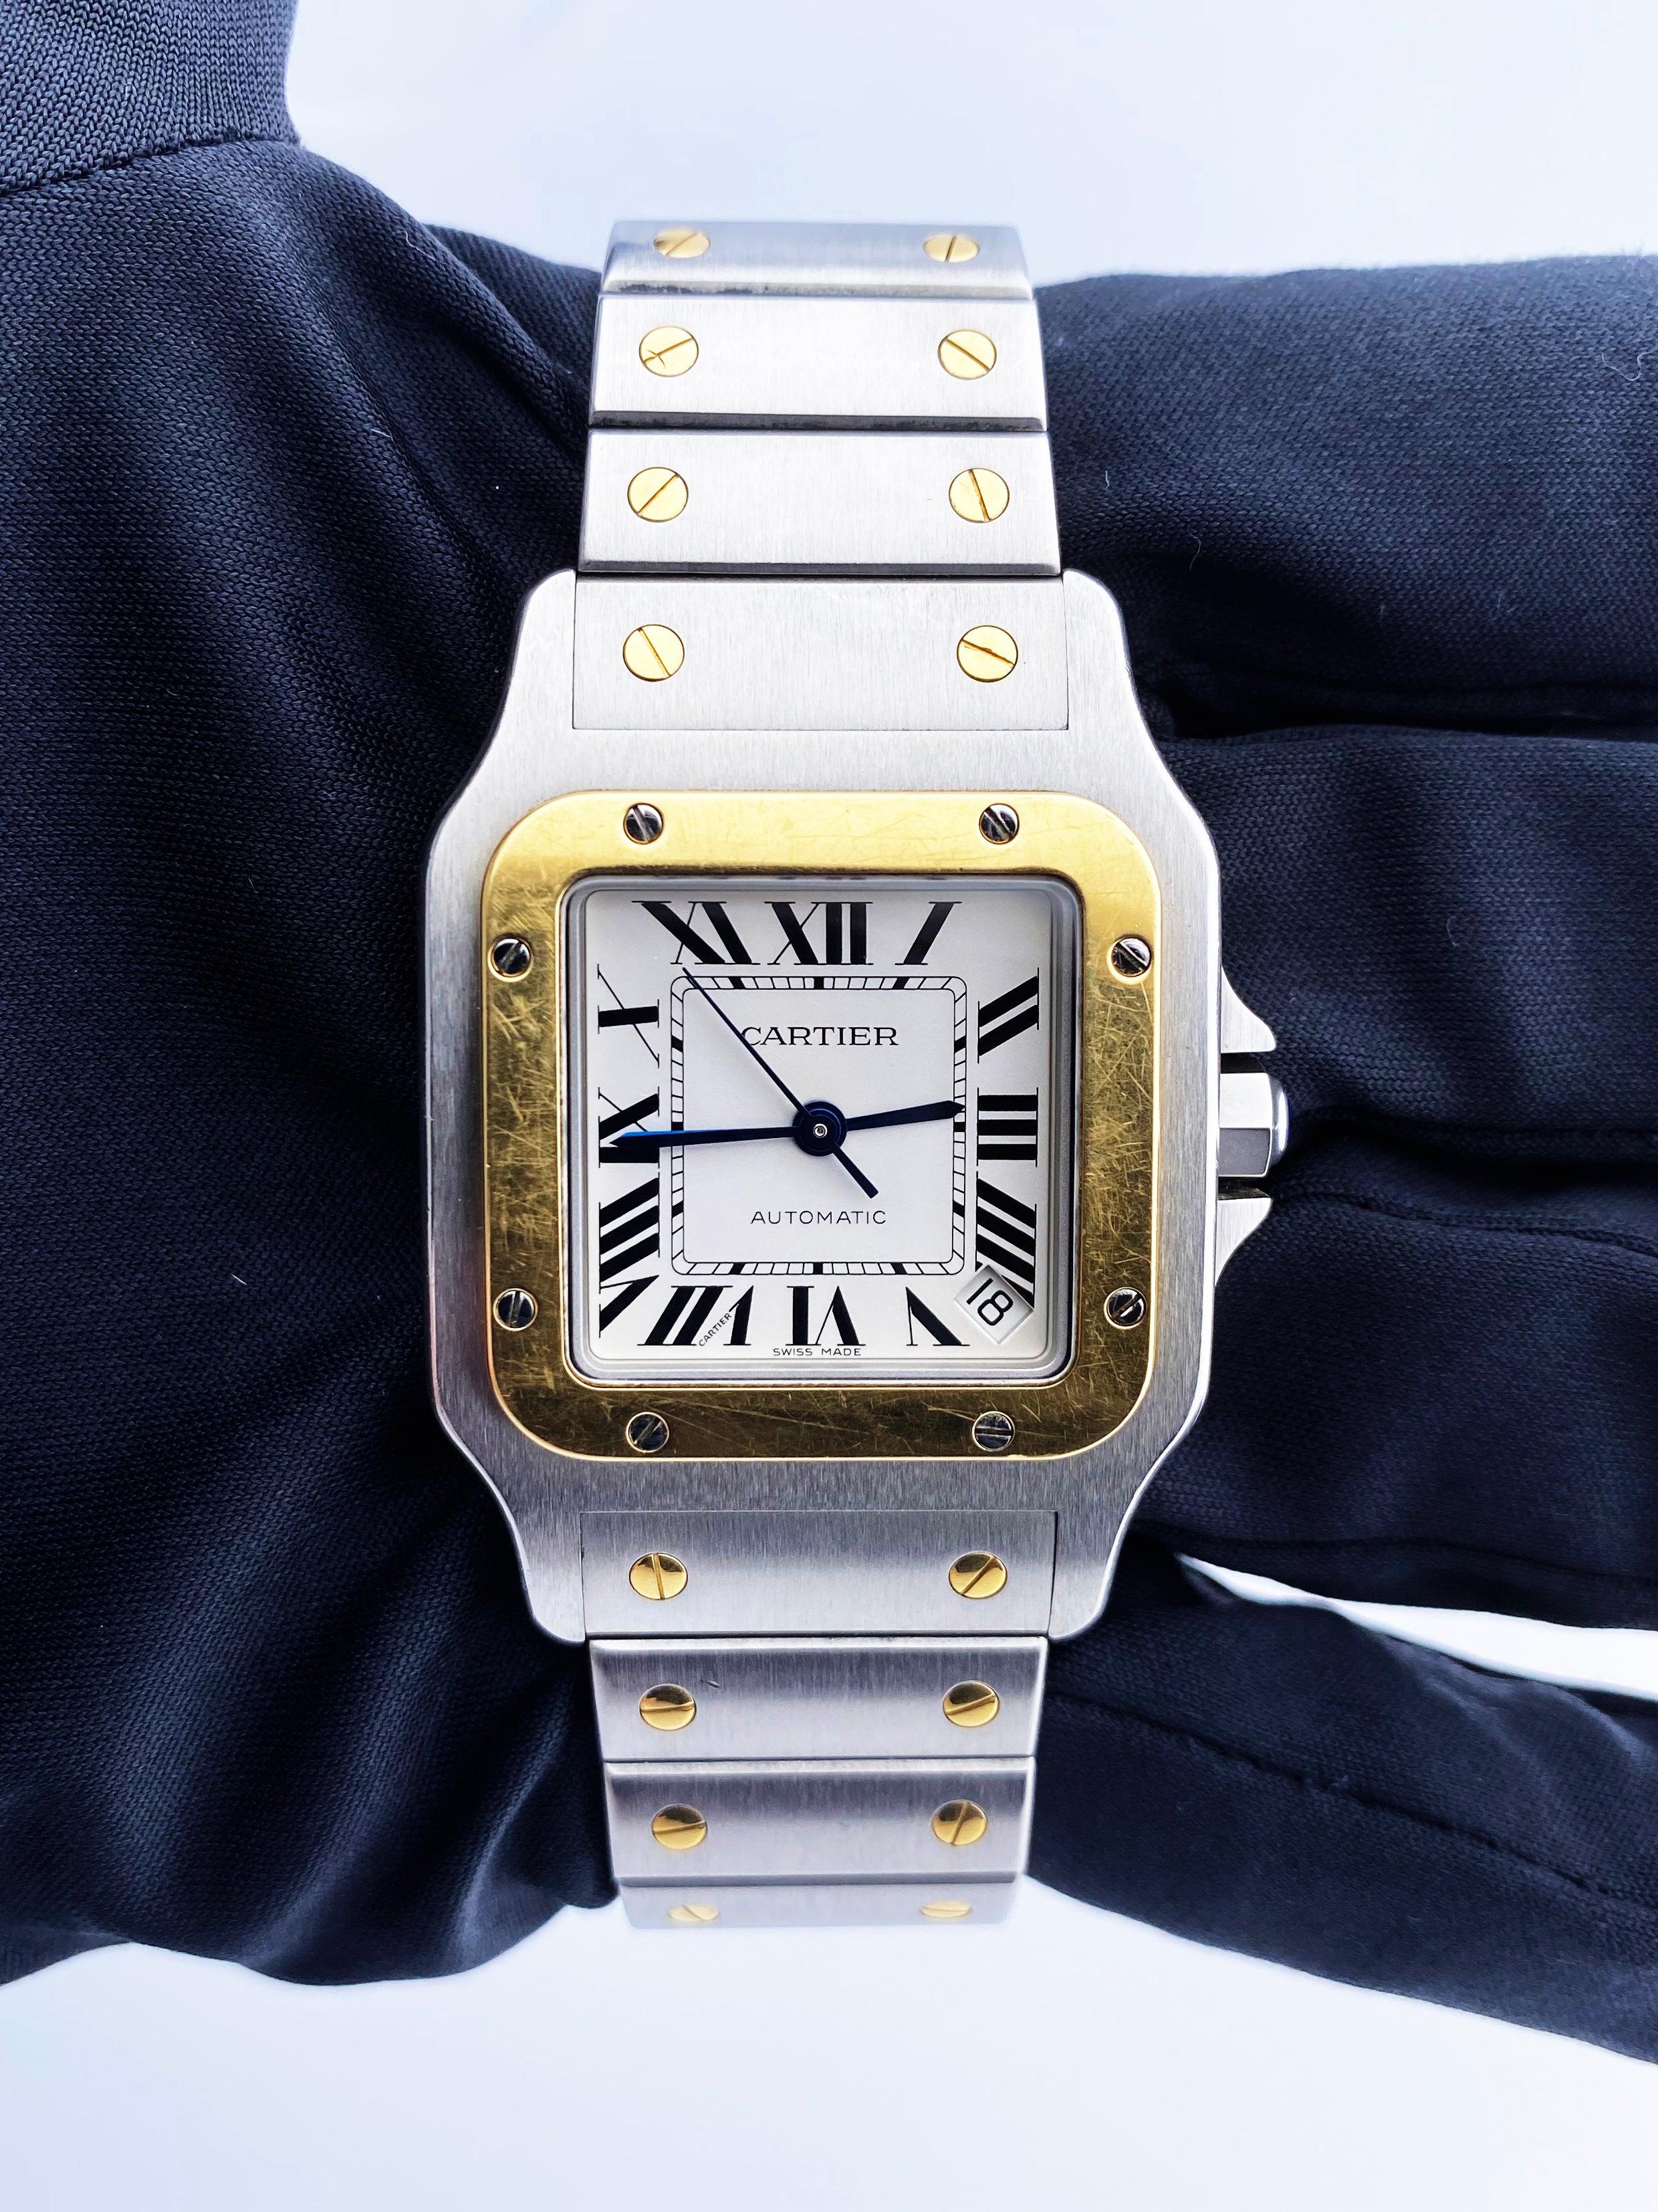 
Cartier Santos 2823 Mens Watch. 32mm stainless steel case. 18K yellow gold bezel. Off-white dial with blue steel hands Black Roman numeral hour markers. Minute markers around an inner dial. Date display between 4 and 5 o'clock position. 18K yellow